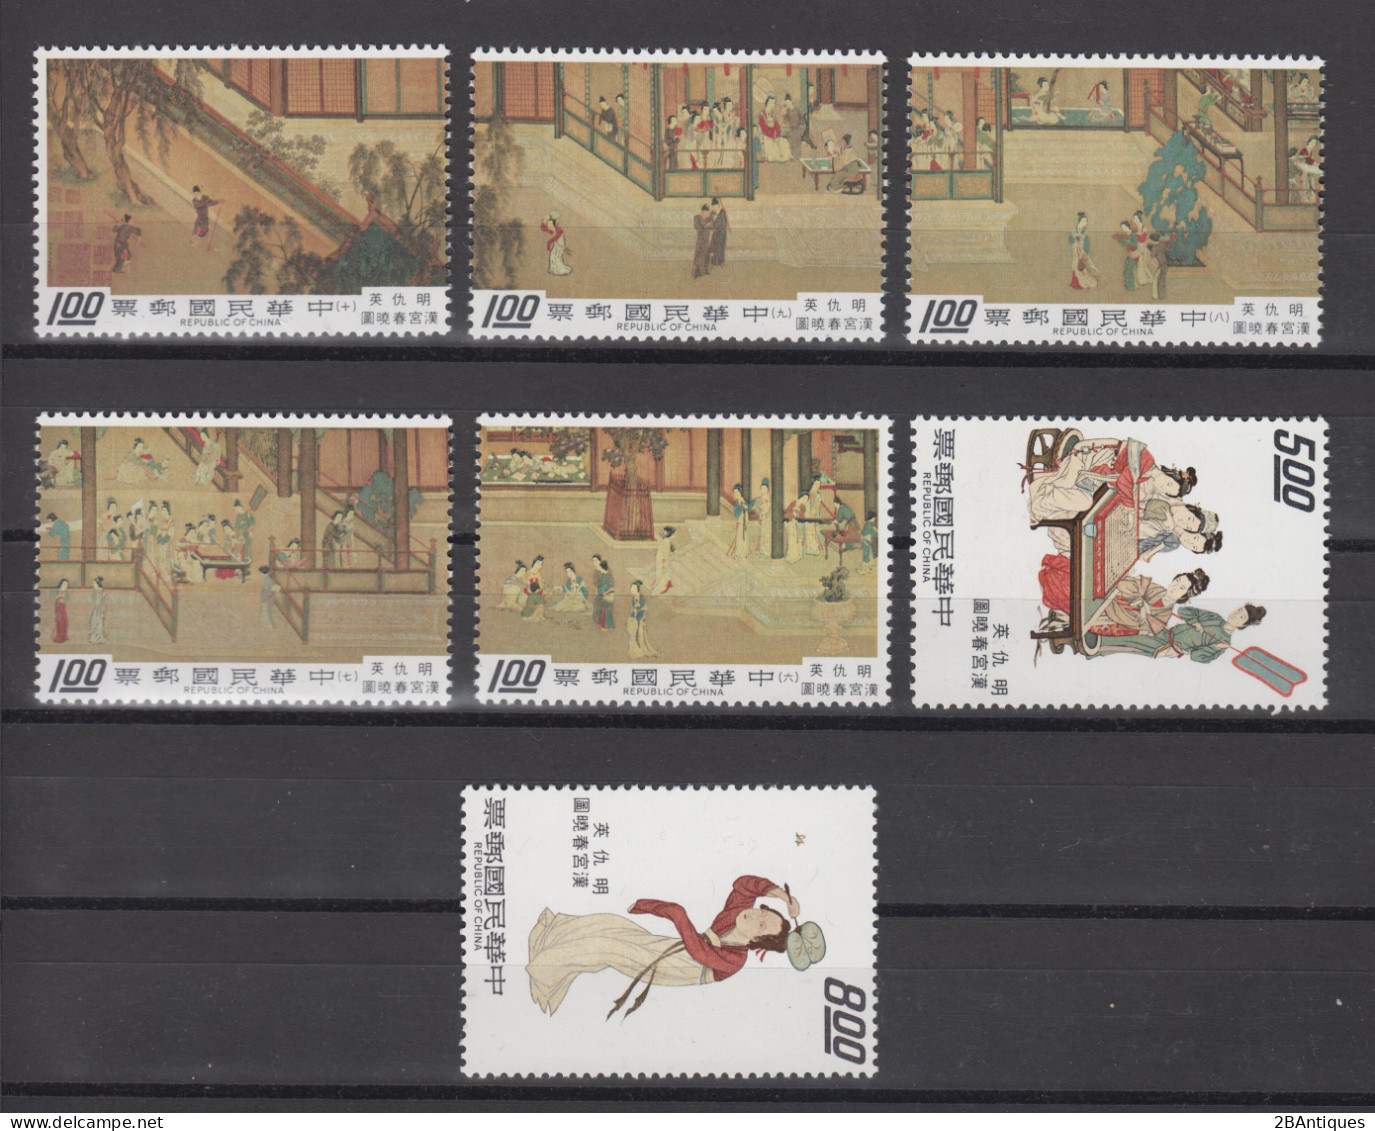 TAIWAN 1973 - "Spring Morning In The Han Palace" - Ming Dynasty Handscroll MNH** OG XF - Unused Stamps